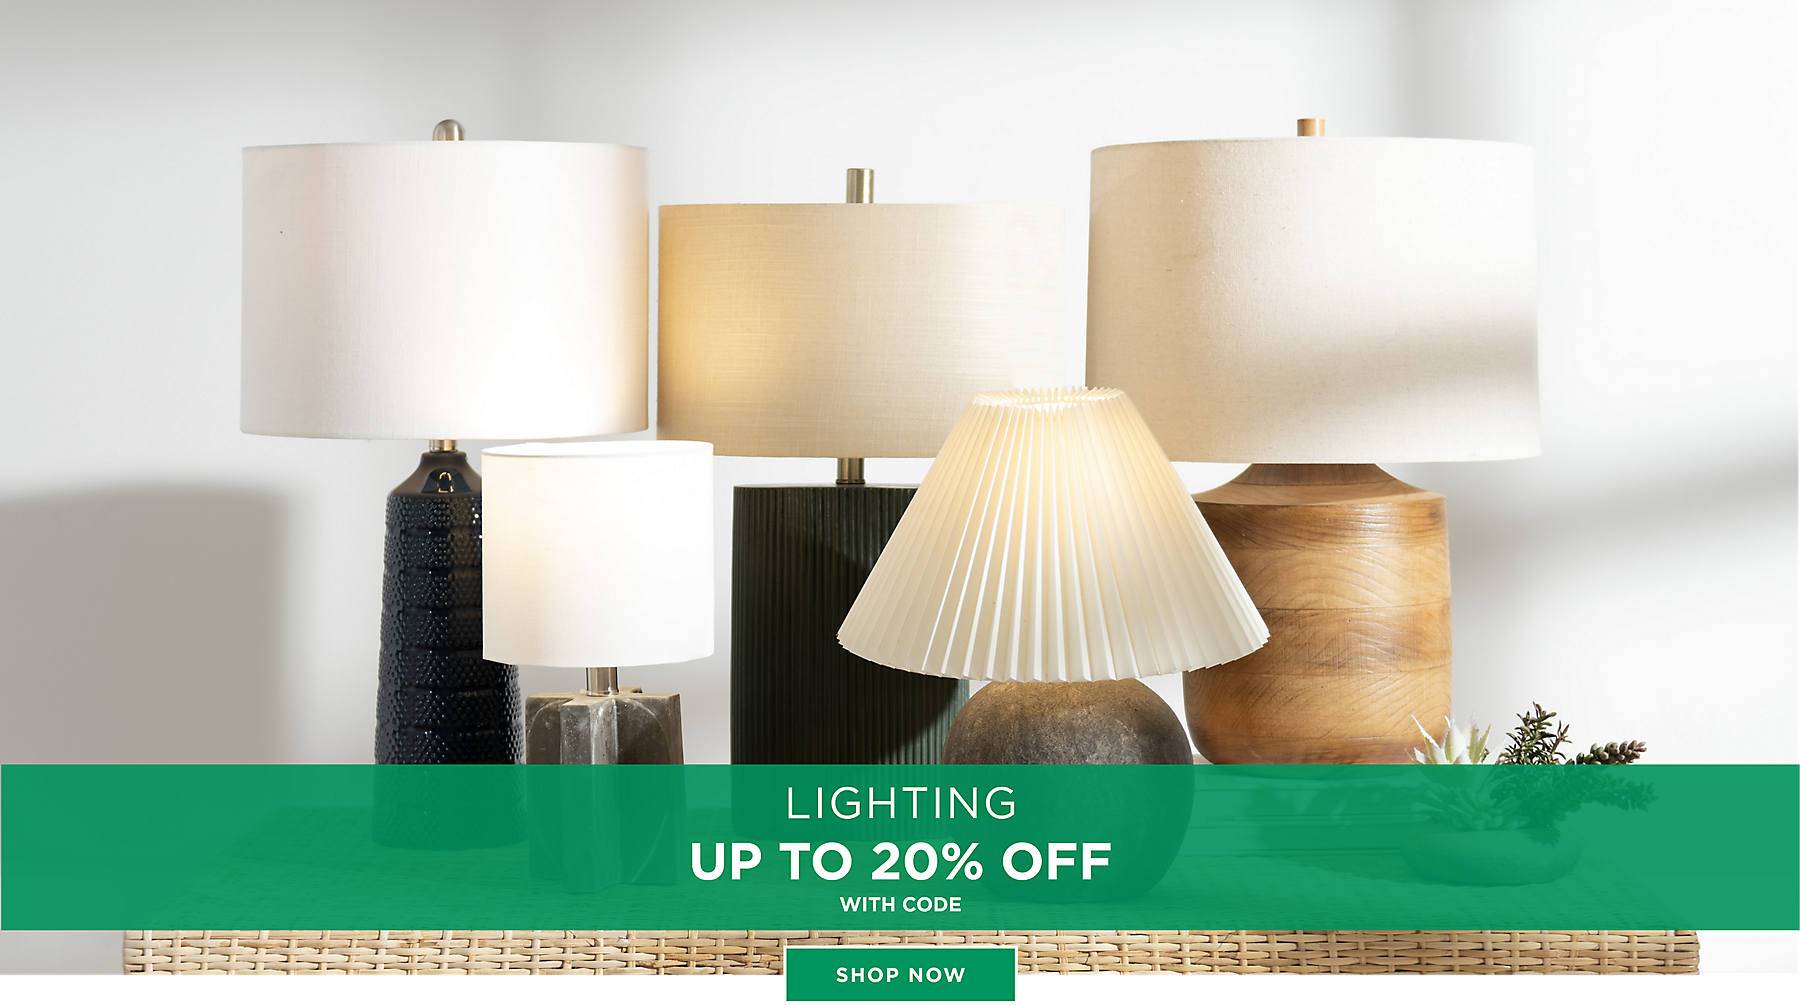 Lighting Up to 20% Off with code Shop Now